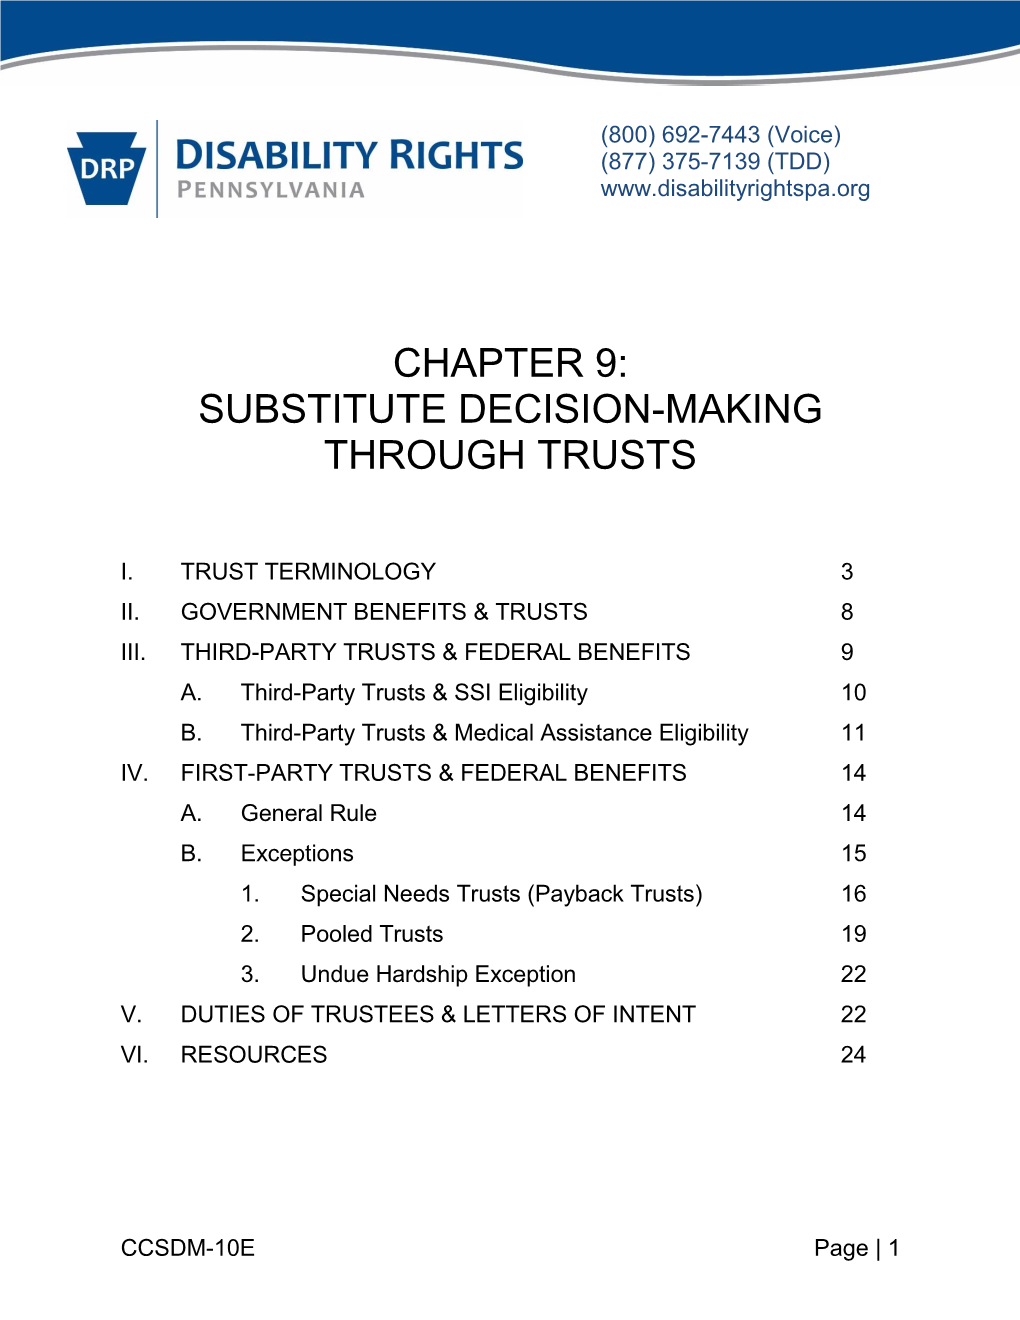 Substitute Decision-Making Through Trusts (Chapter 9) CCSDM-10E